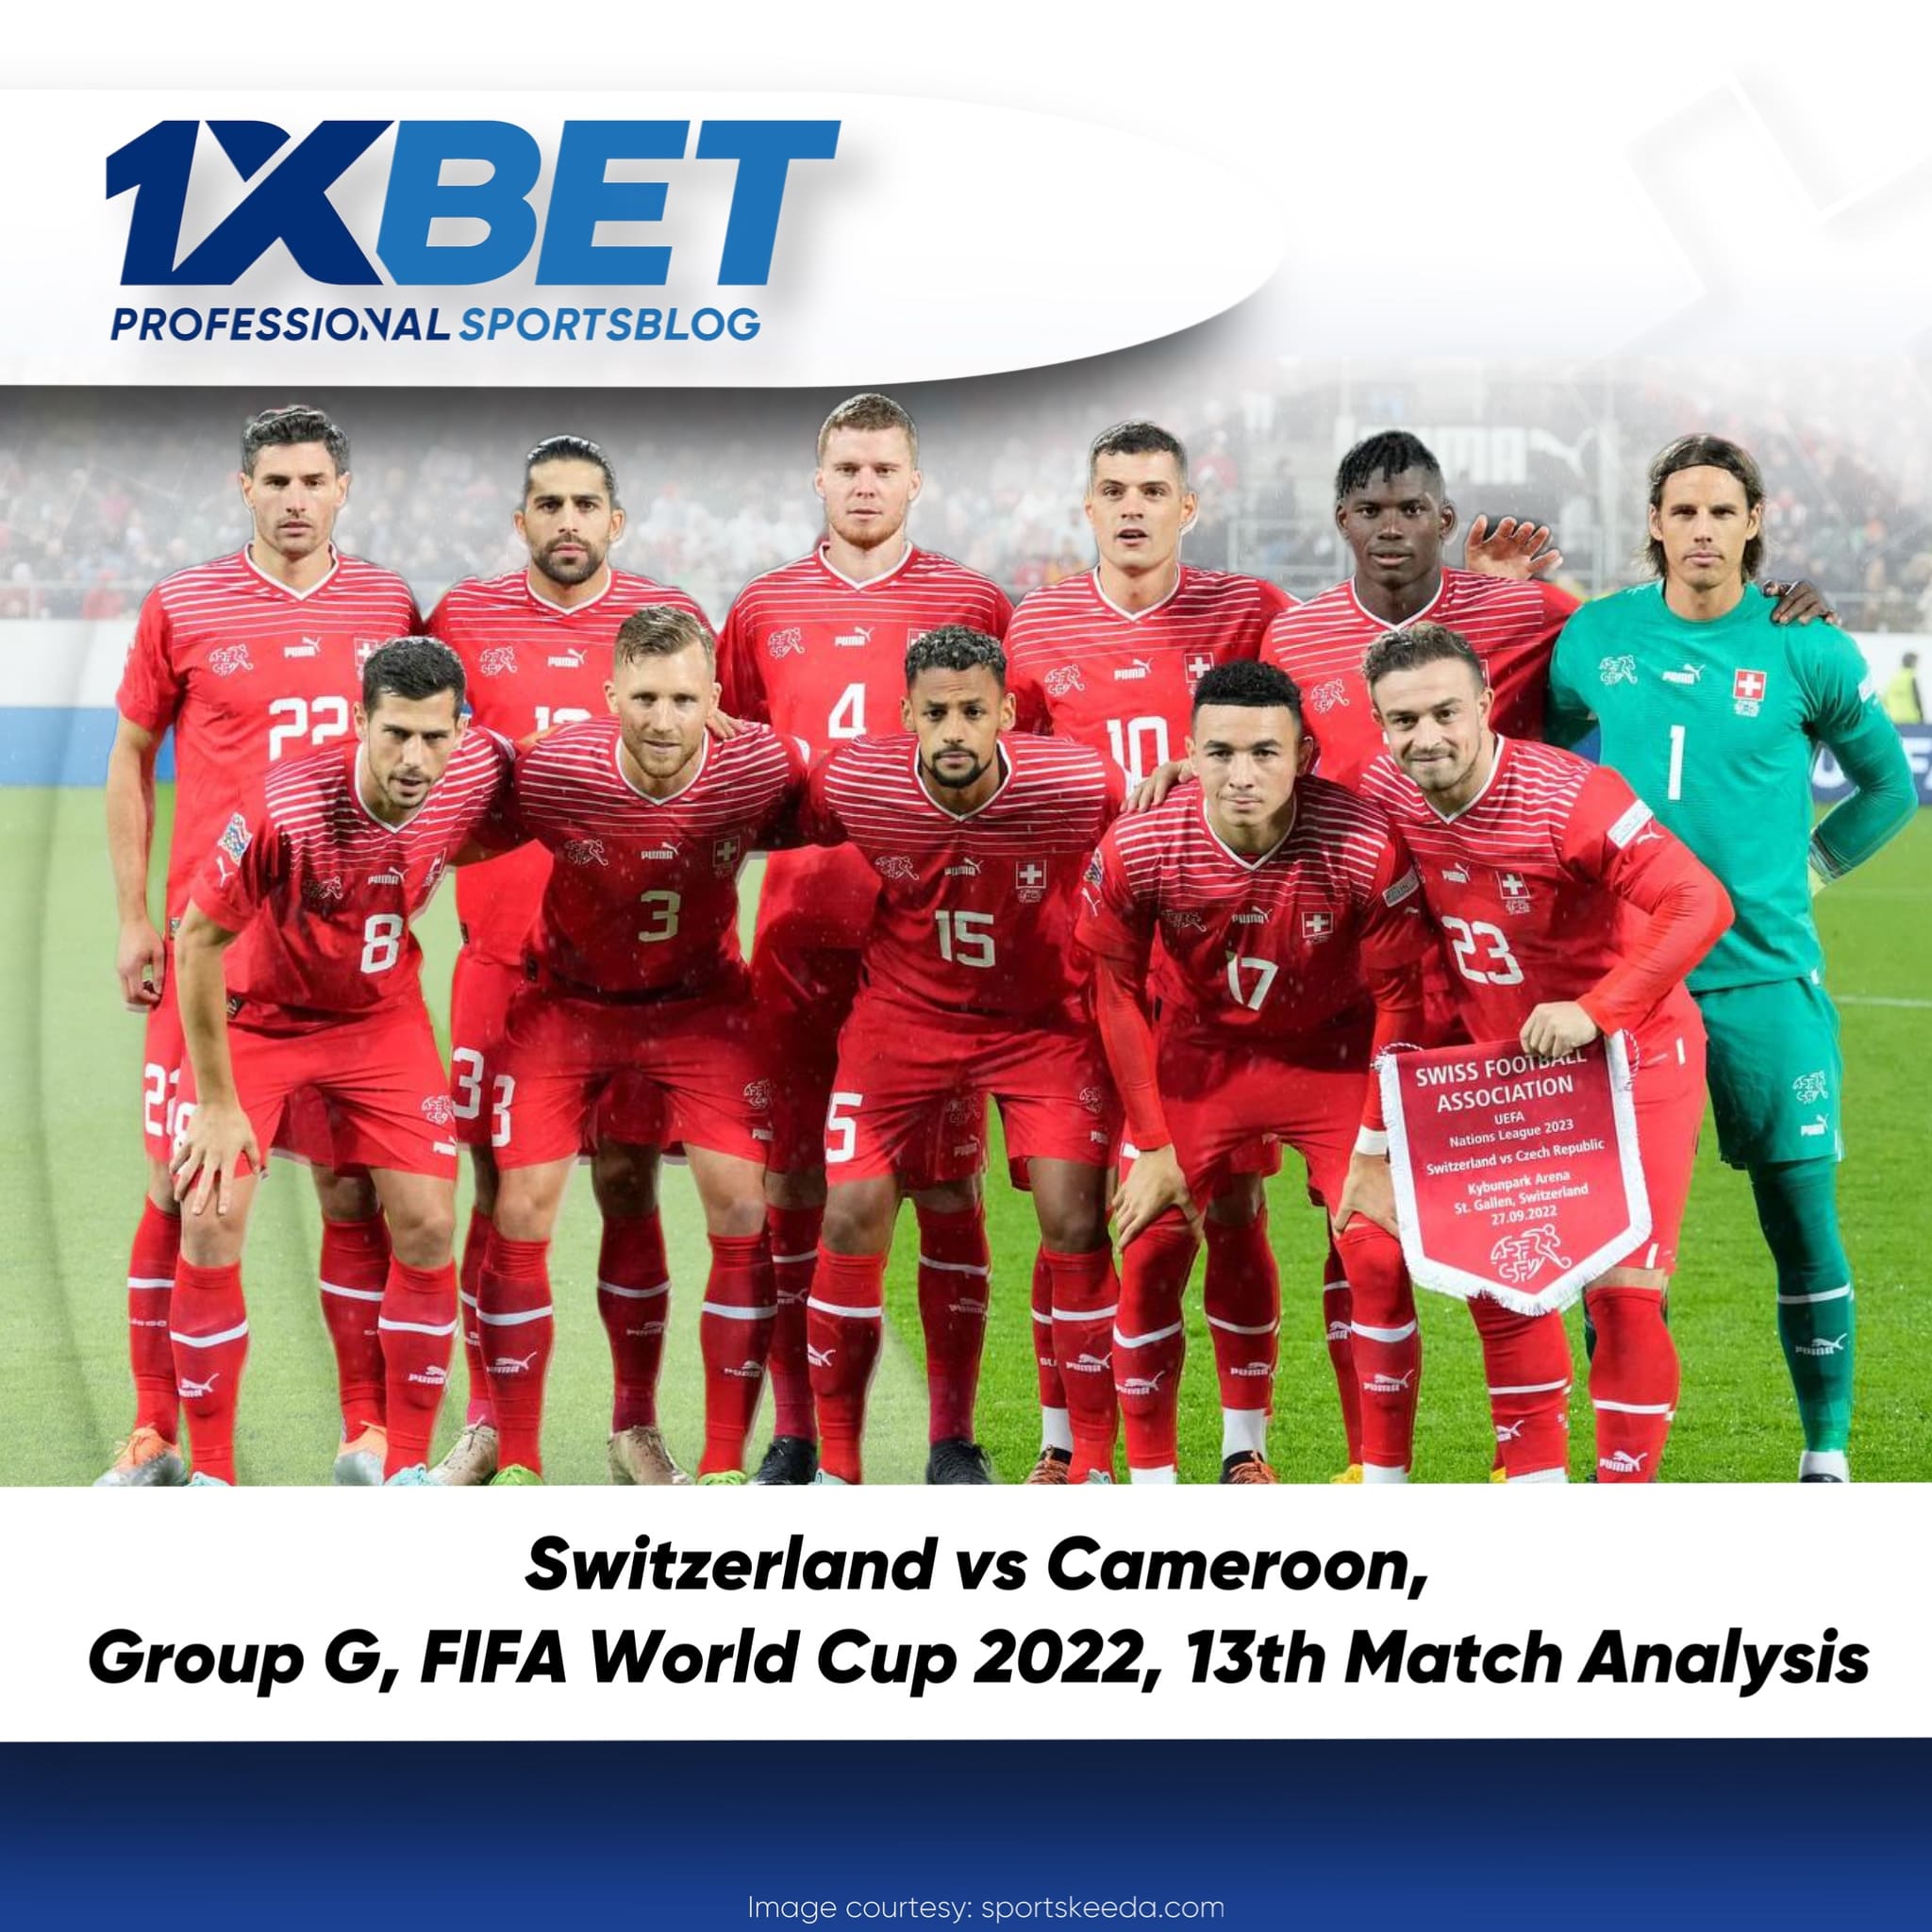 Switzerland vs Cameroon, Group G, FIFA World Cup 2022, 13th Match Analysis